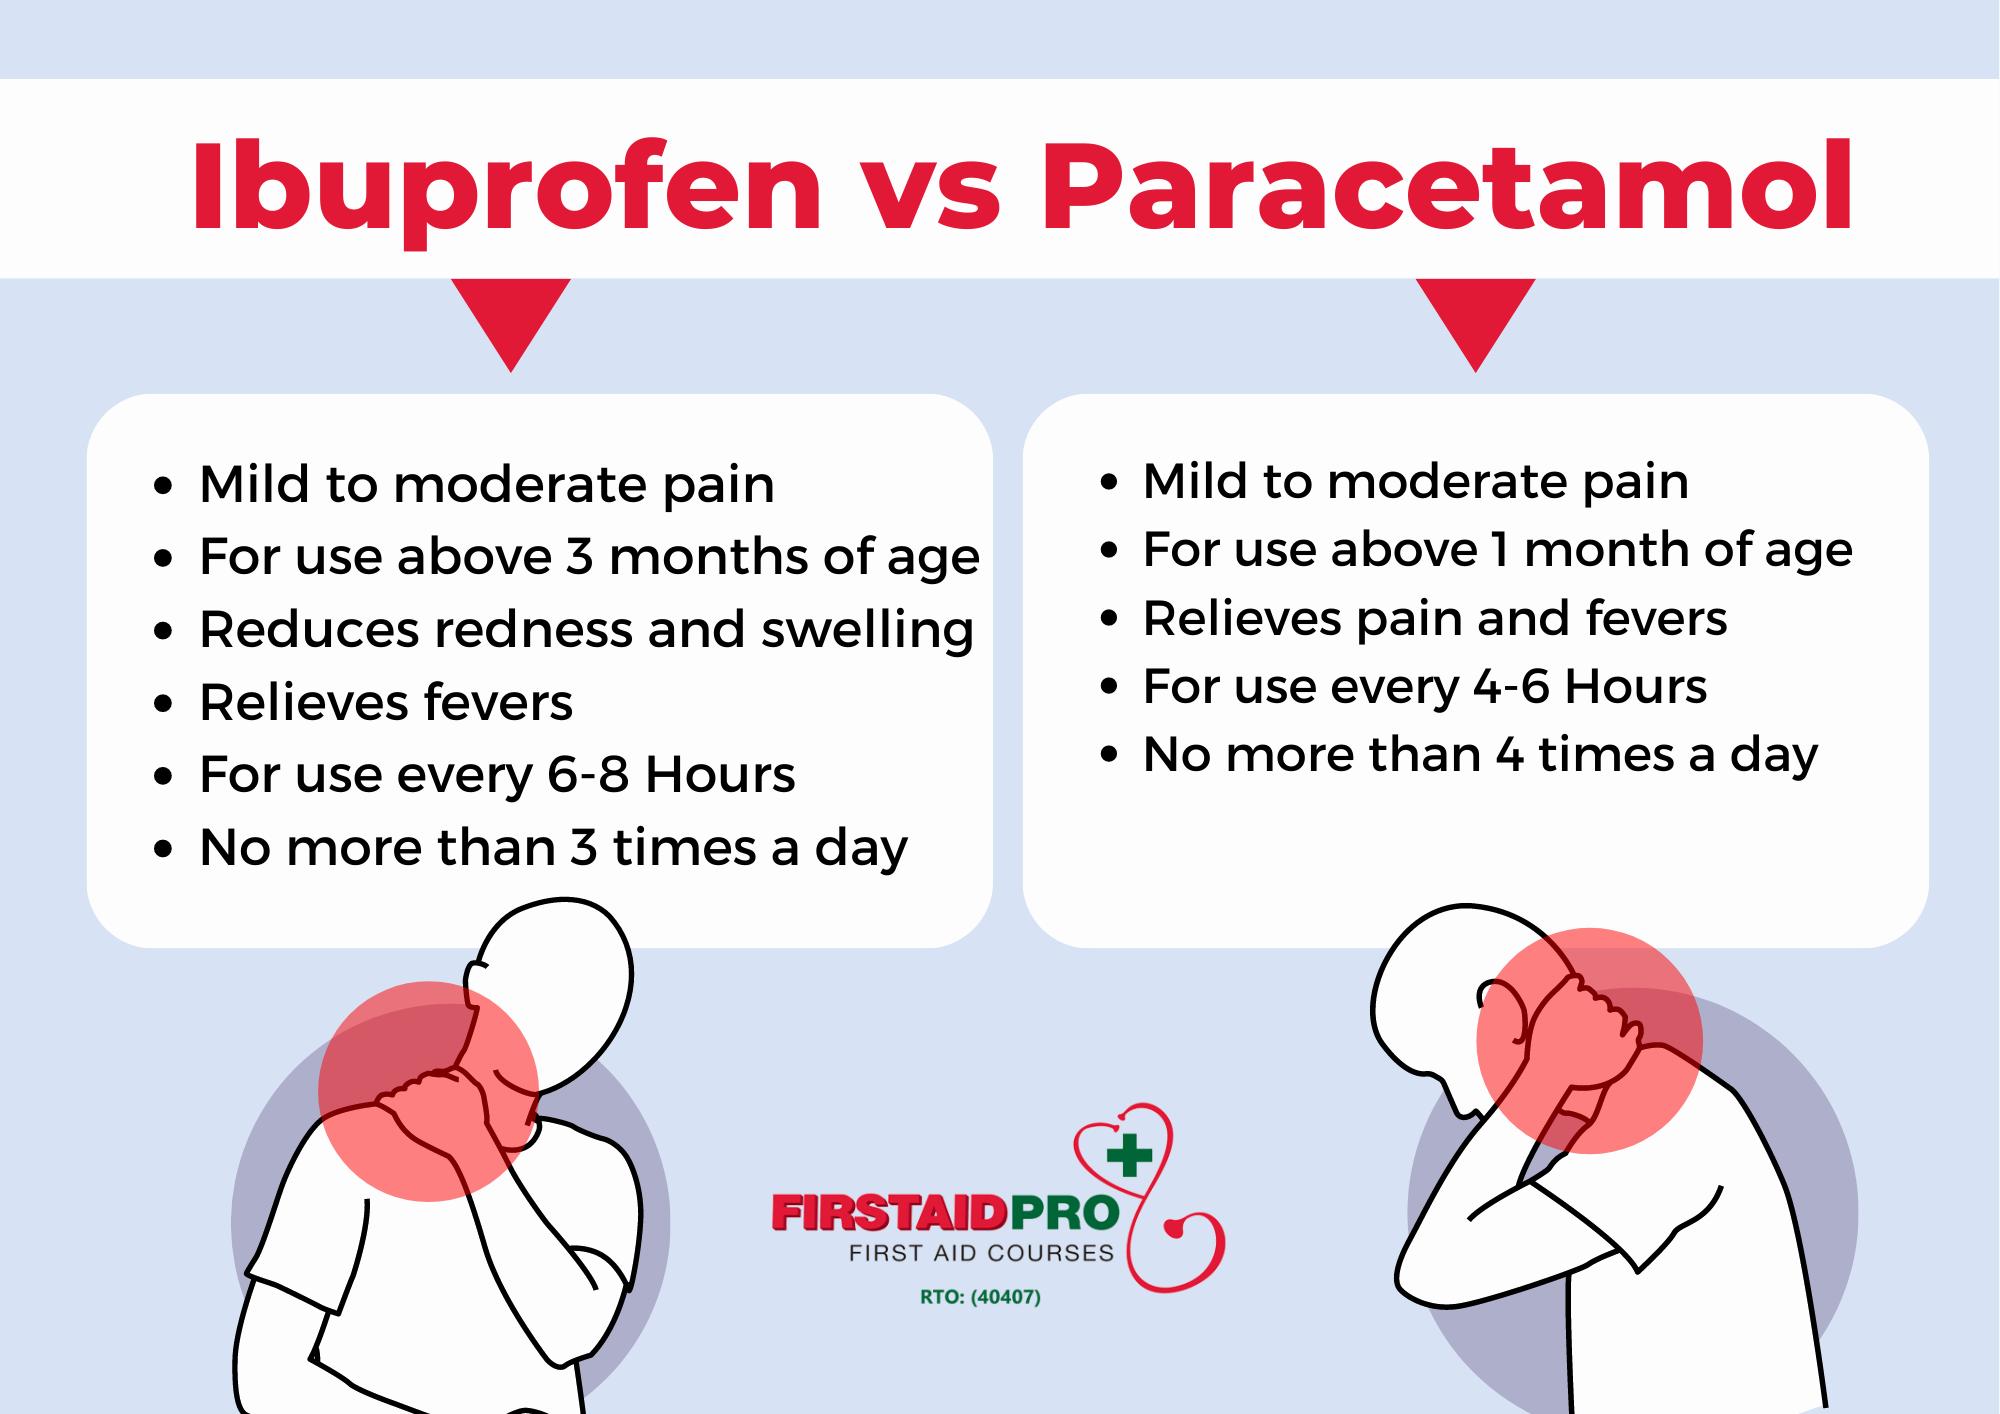 A comparison of ibuprofen and paracetamol, including information about when each should be used and their side effects.